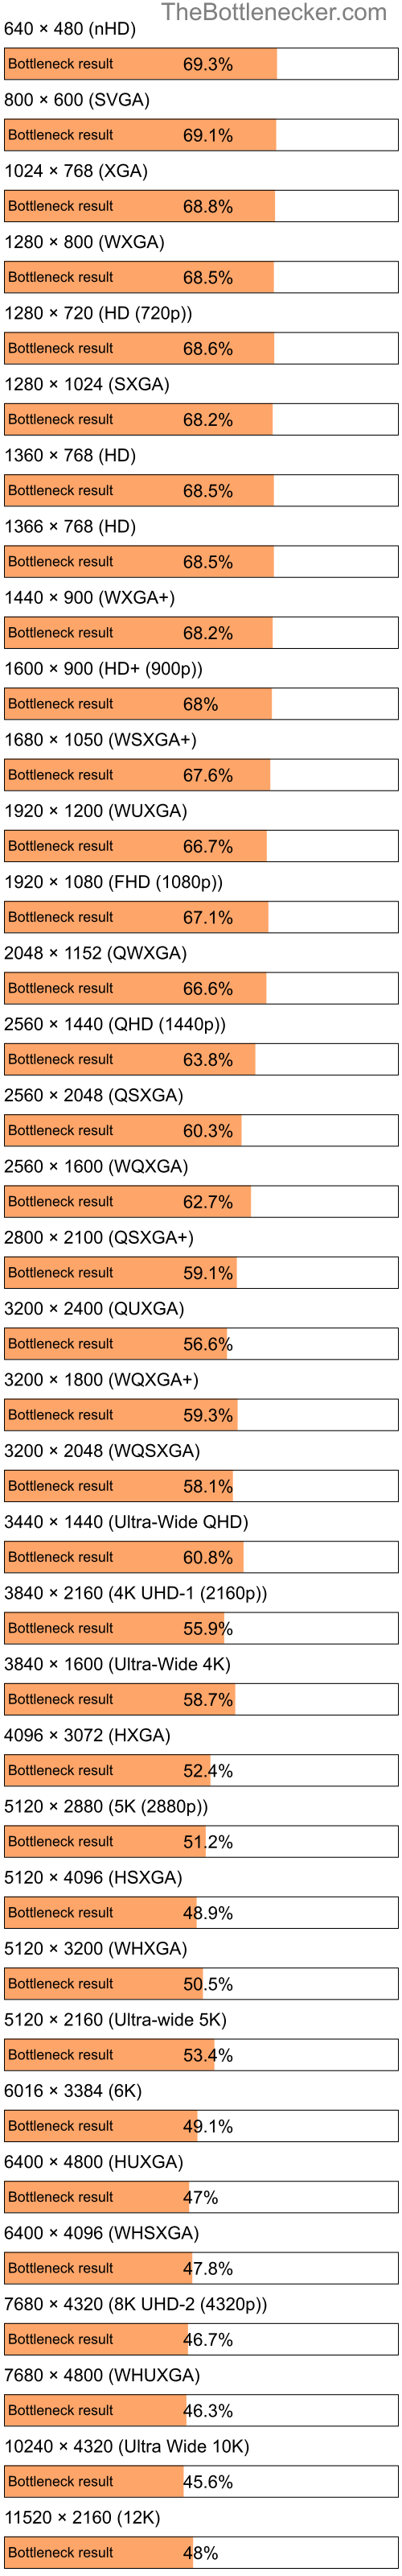 Bottleneck results by resolution for Intel Core i5-4310U and AMD Radeon RX 7900 XTX in Graphic Card Intense Tasks